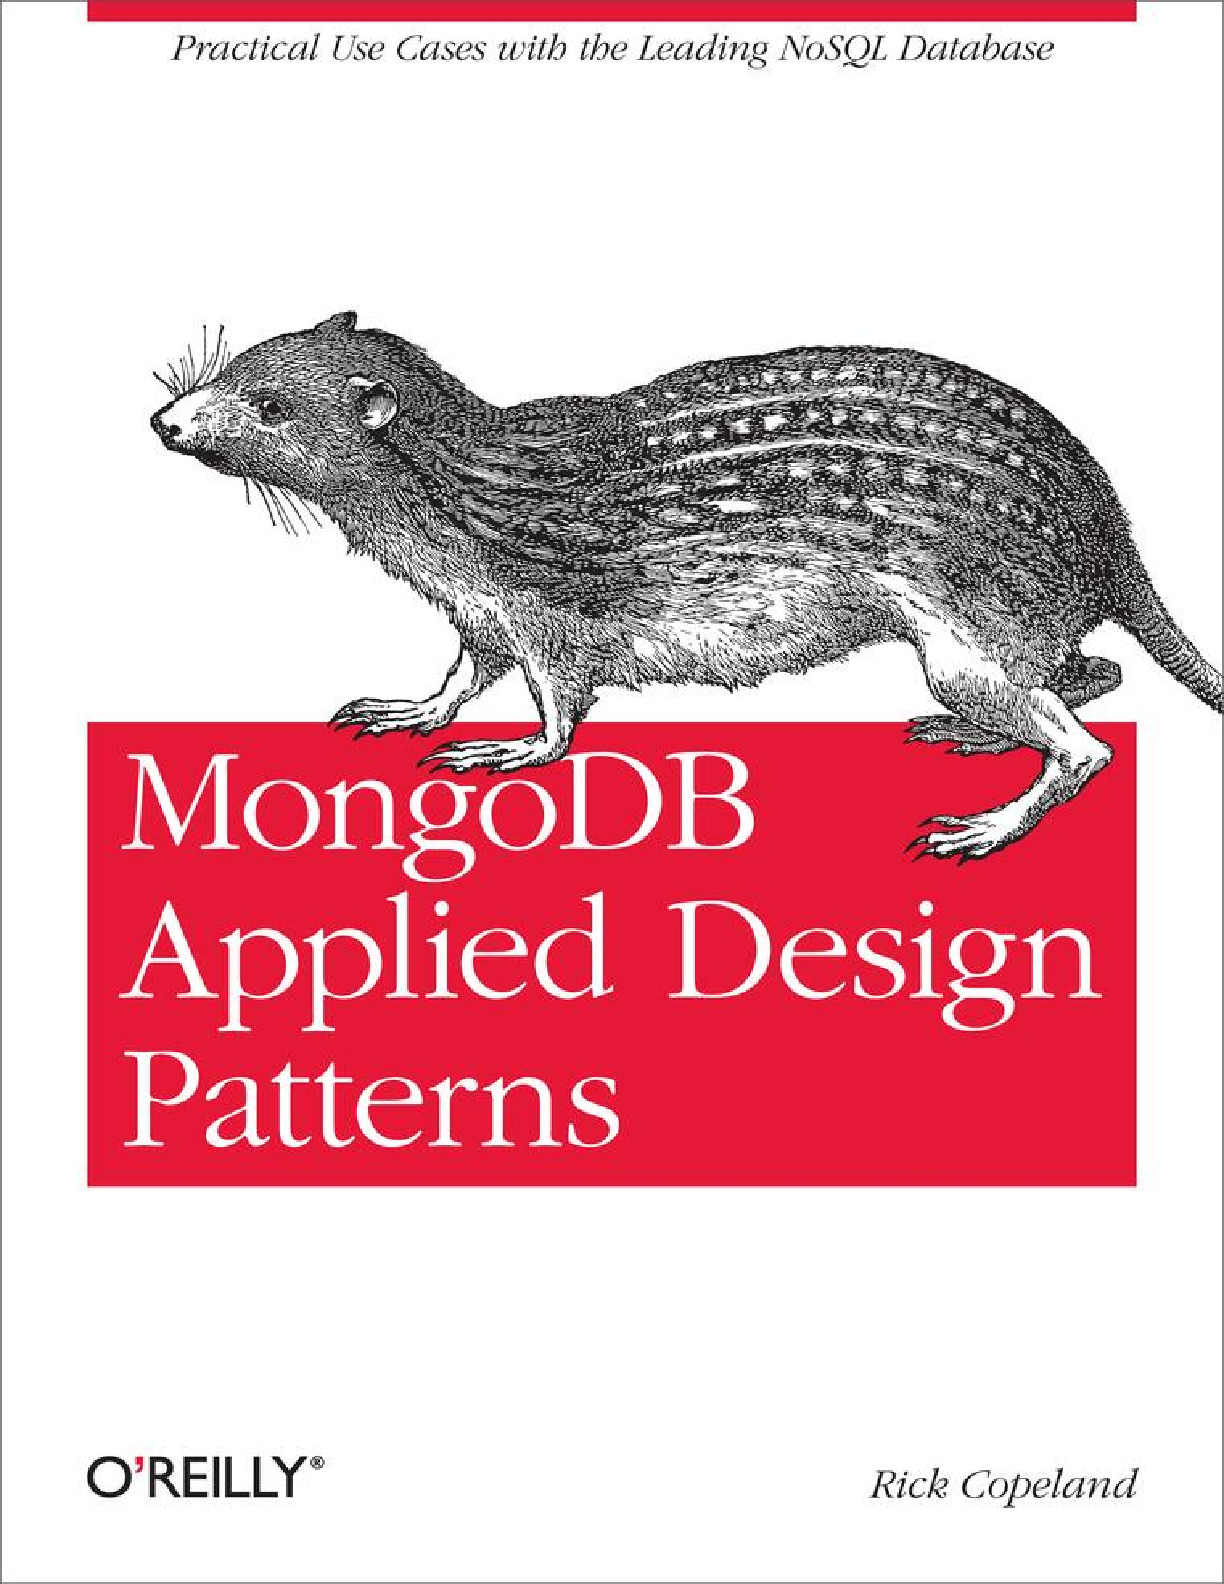 Rick Copeland – MongoDB Applied Design Patterns_ Practical Use Cases with the Leading NoSQL Database-O’Reilly Media (2013)